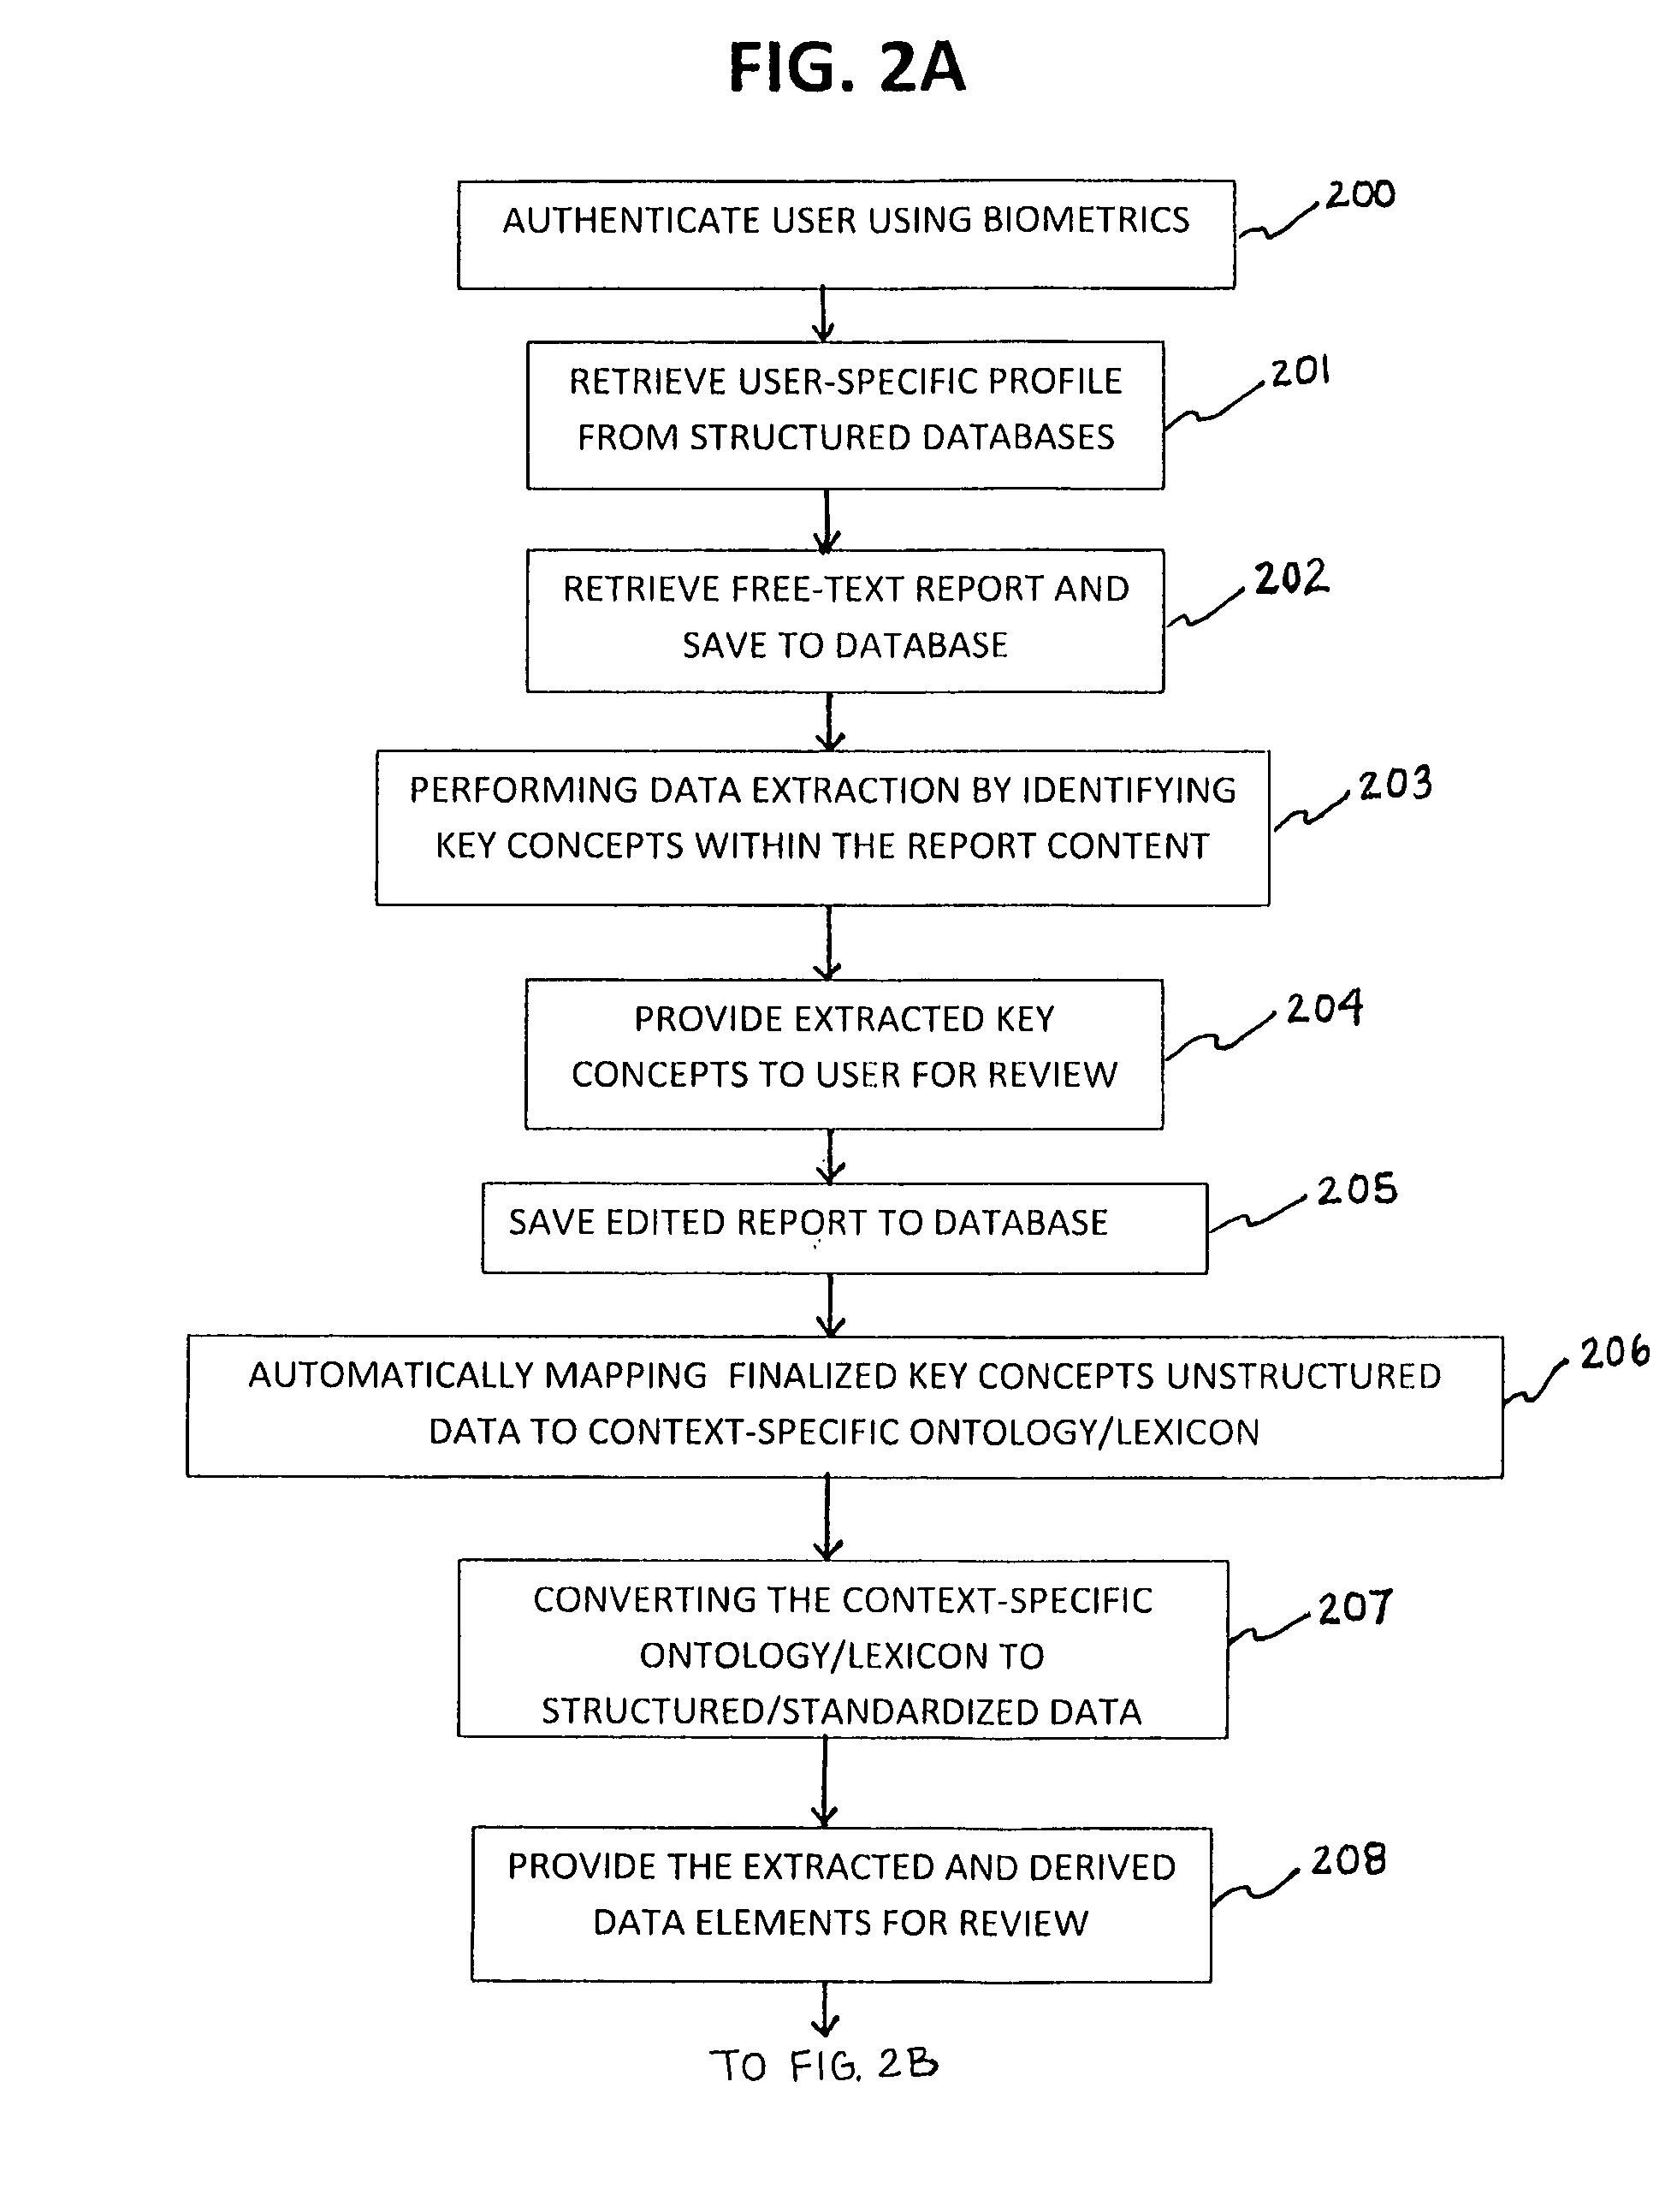 Method of extracting real-time structured data and performing data analysis and decision support in medical reporting